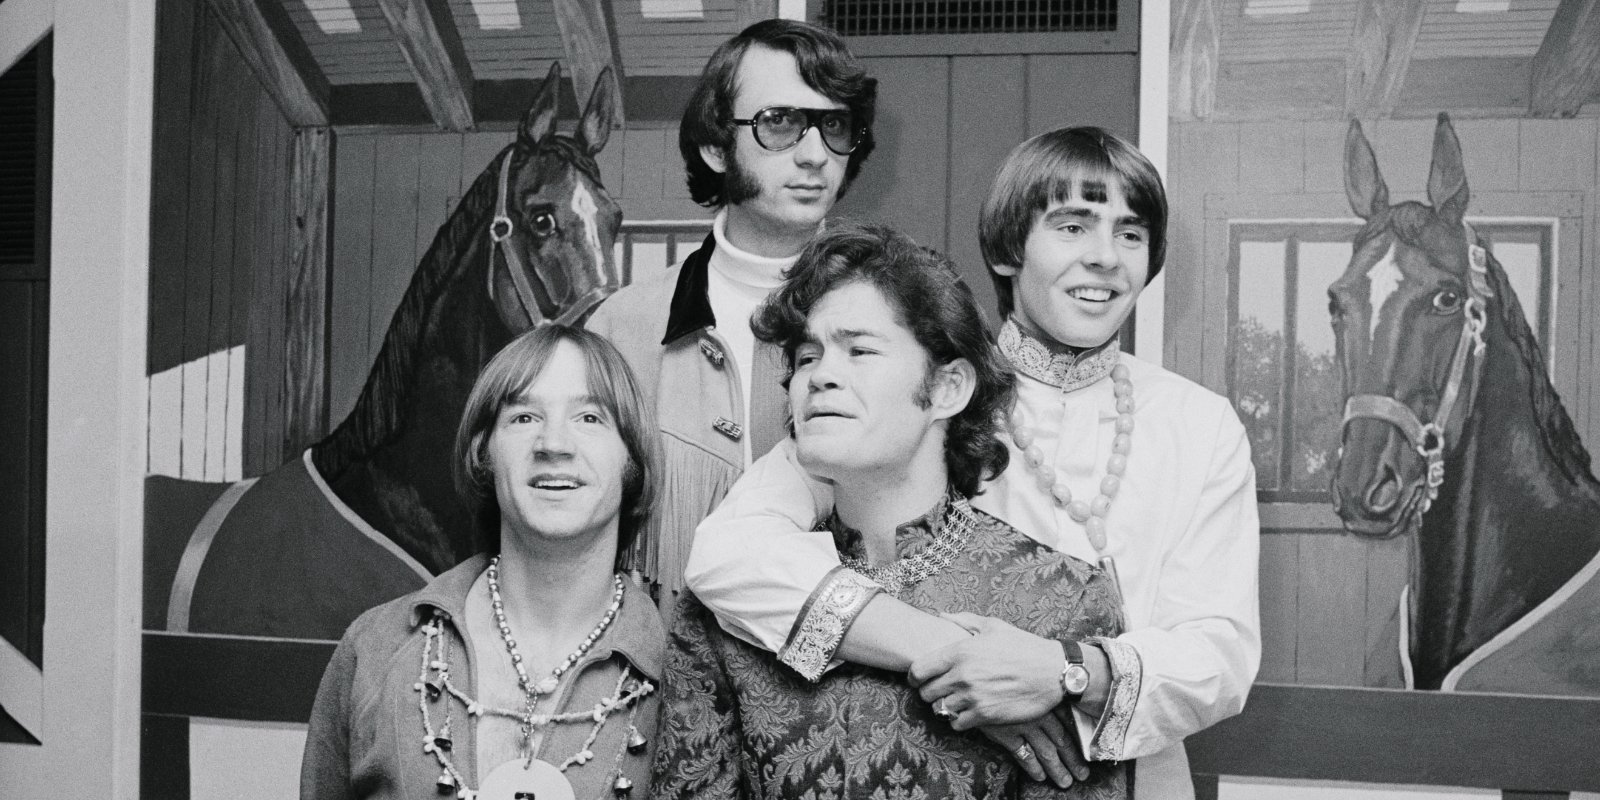 Peter Tork, Mike Nesmith, Micky Dolenz and Davy Jones photographed in New York City.